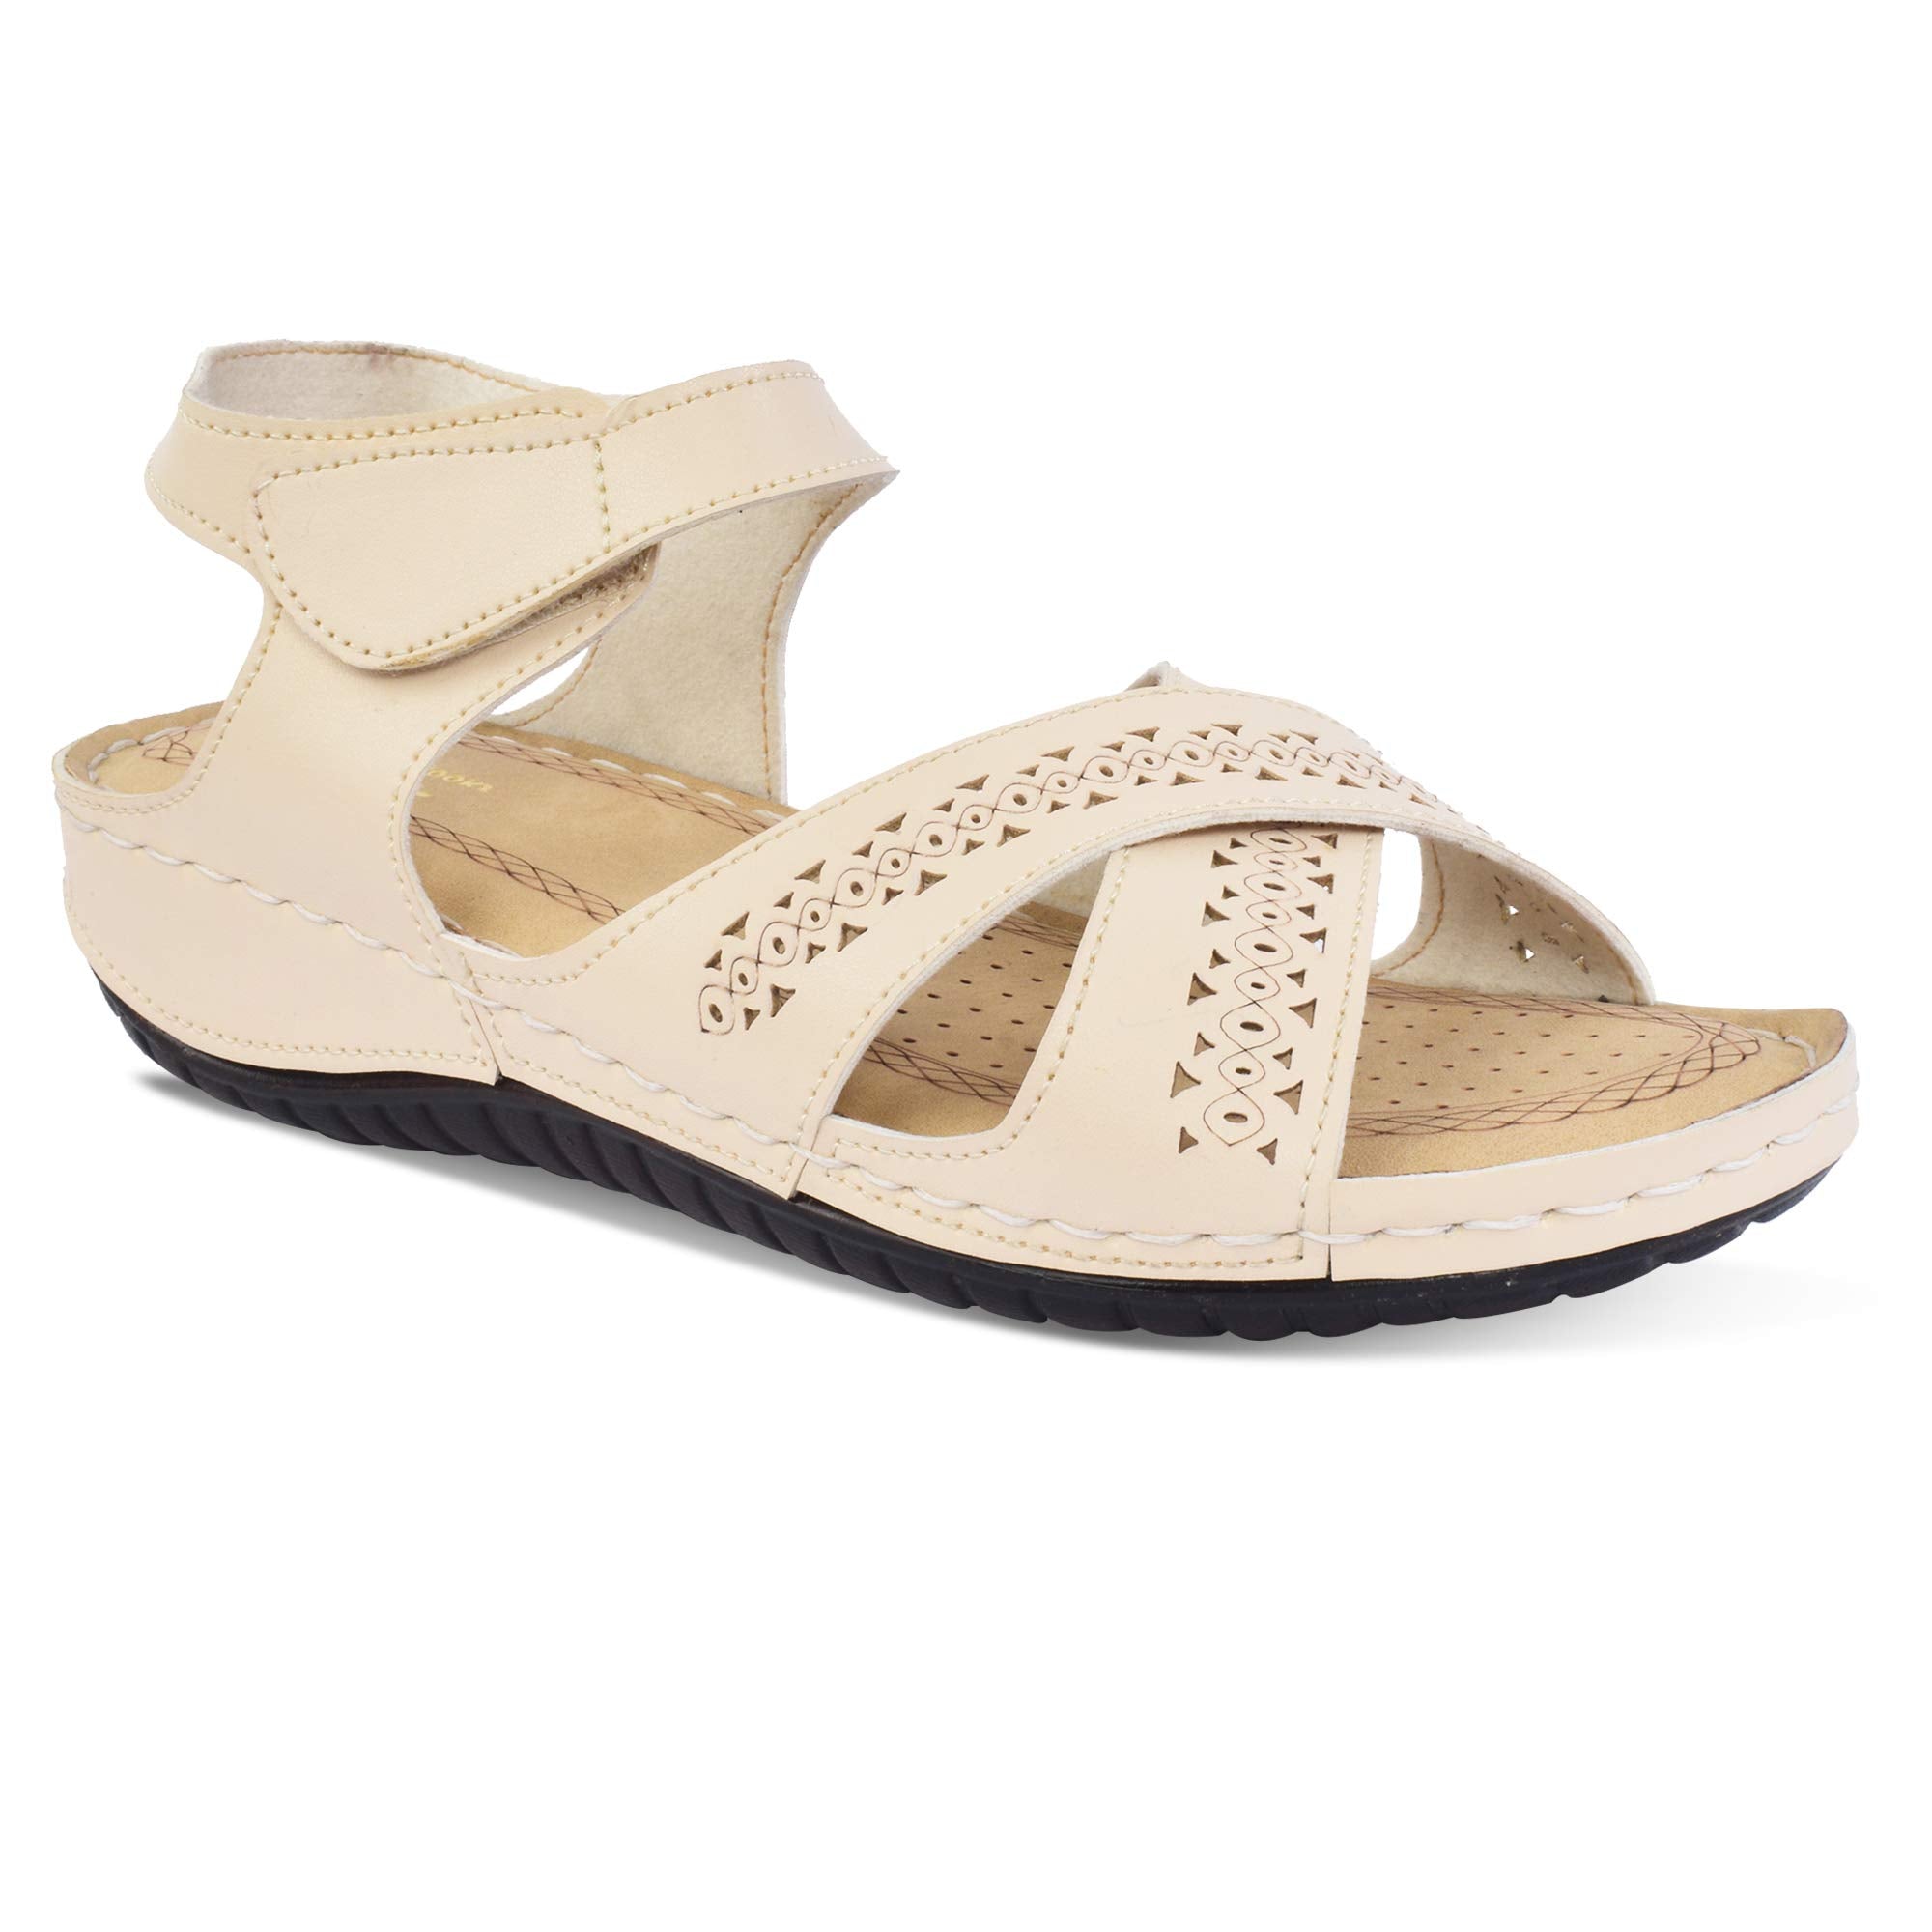 XE Looks Doctor Sole Laser Cut Cross Strap Sandals For Women -  Fashion Sandals in Sri Lanka from Arcade Online Shopping - Just Rs. 5099!